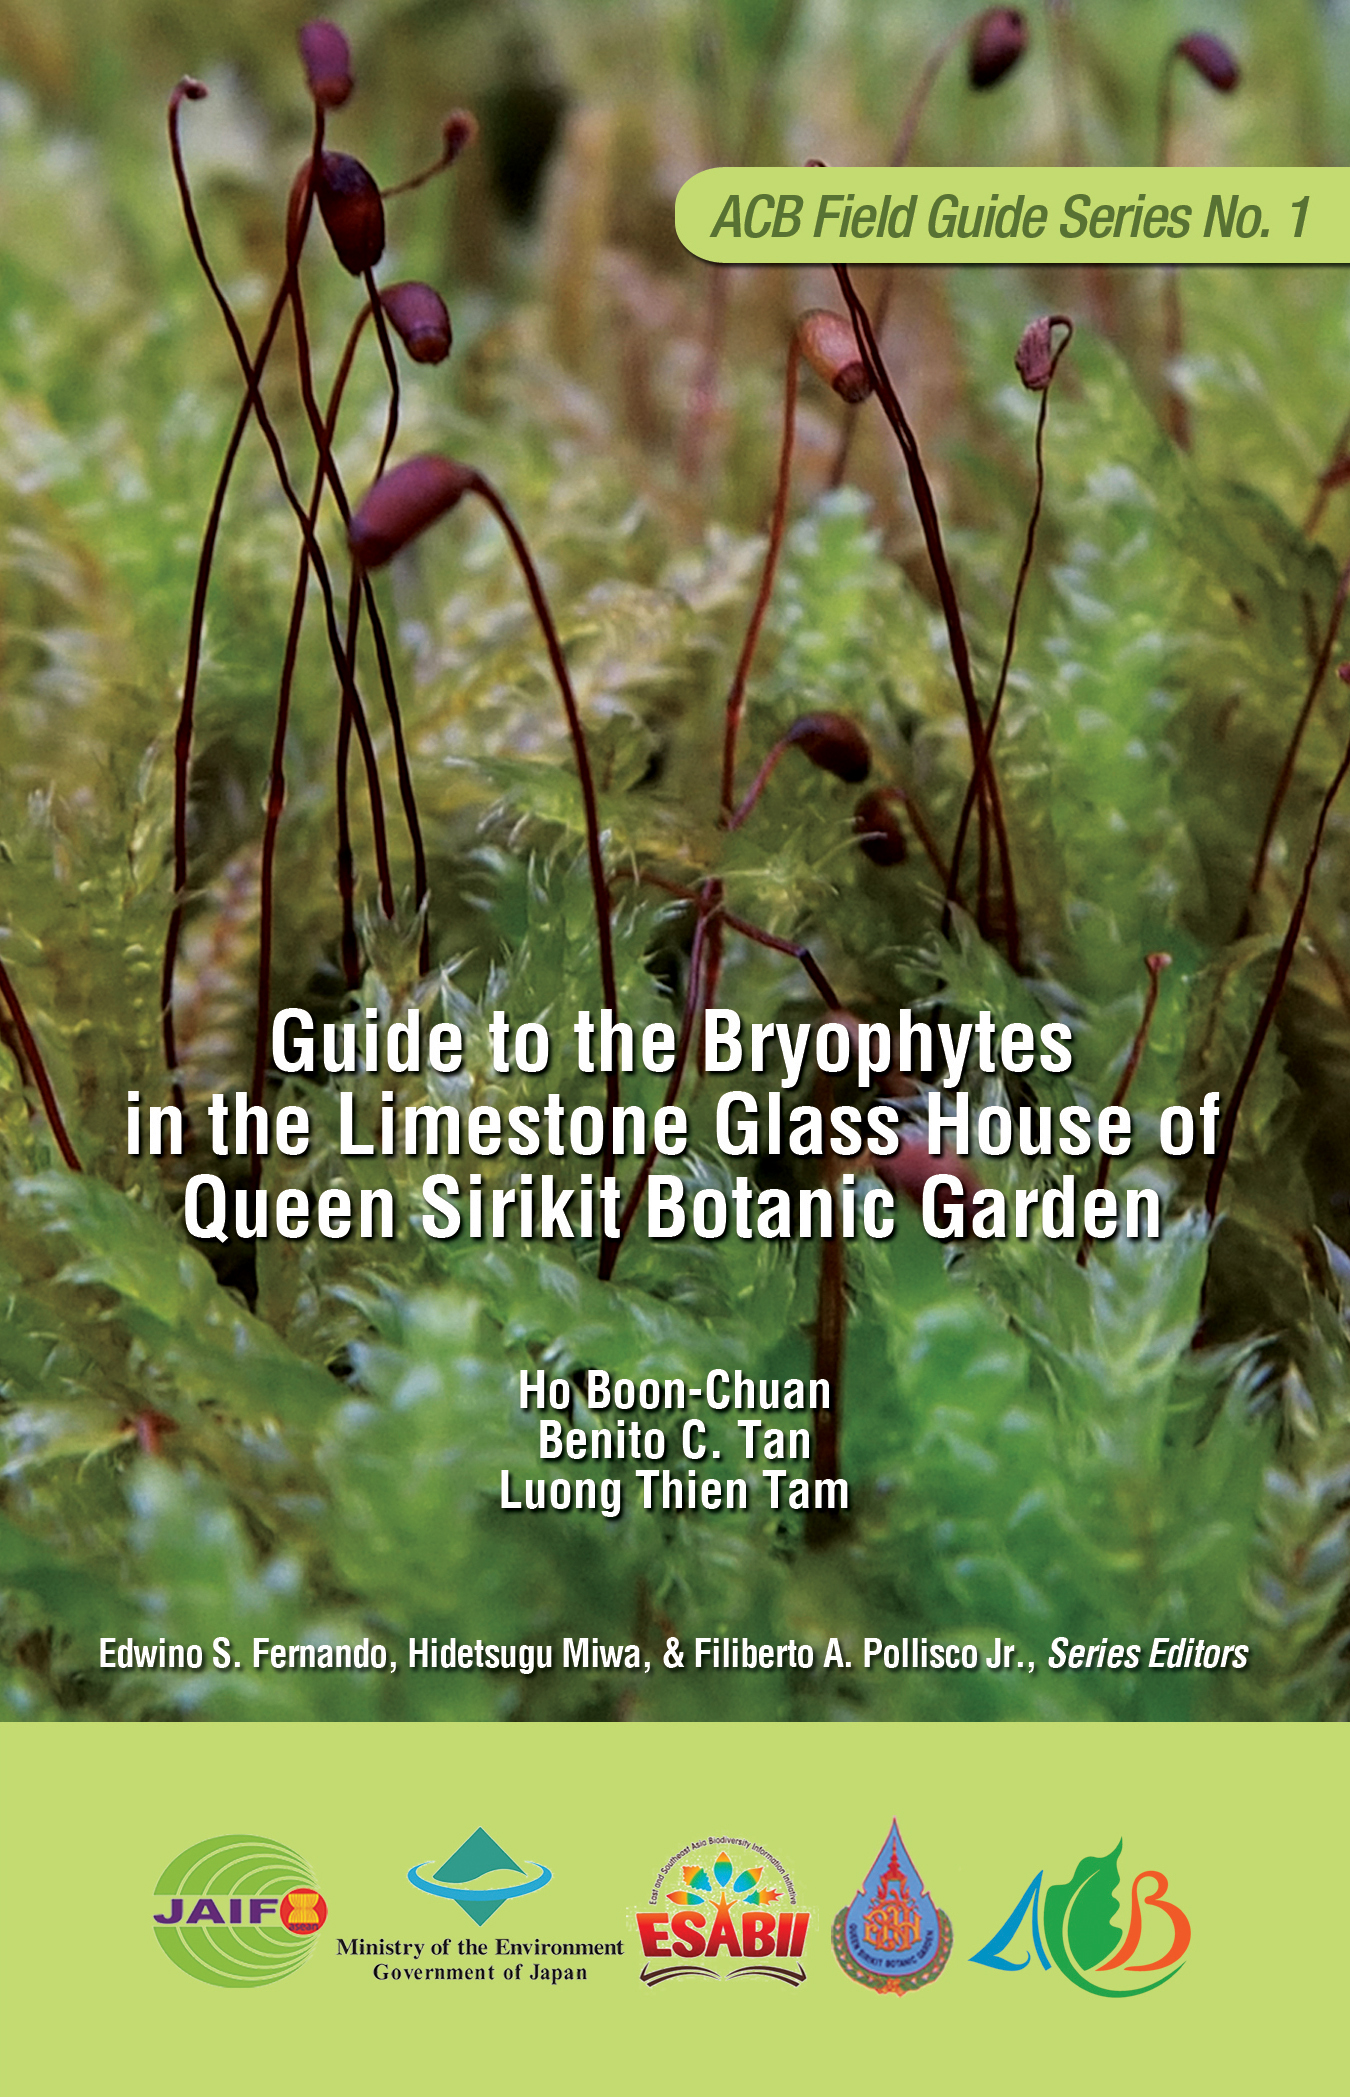 Guide to the Bryophytes in the Limestone Glass House of Queen Sirikit Botanic Garden